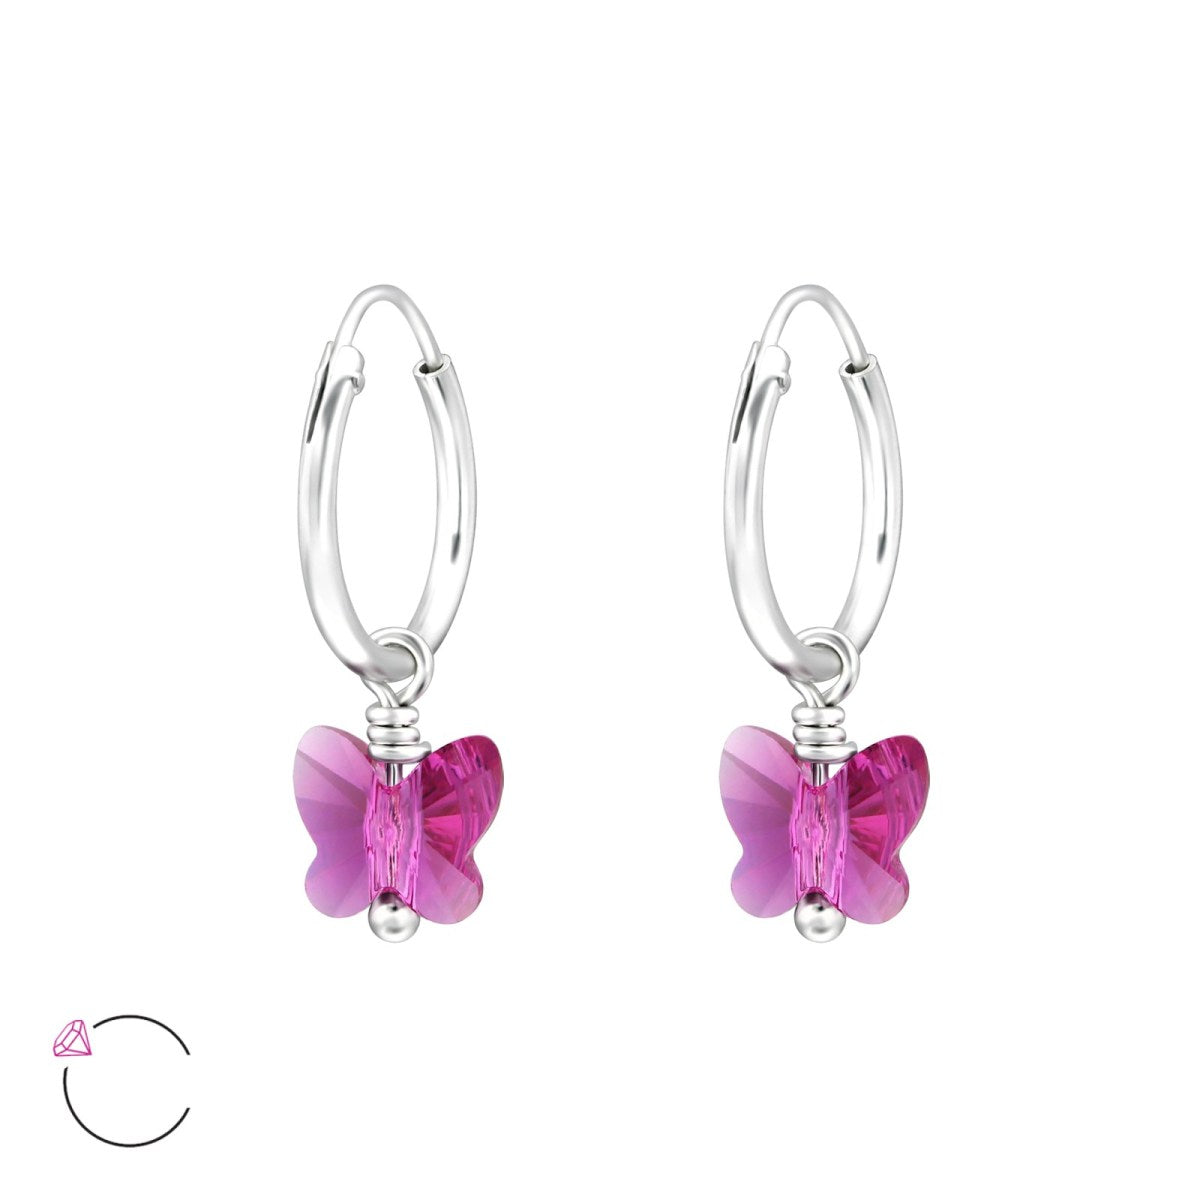 Silver Hoop Earrings with Hanging Crystal Butterfly